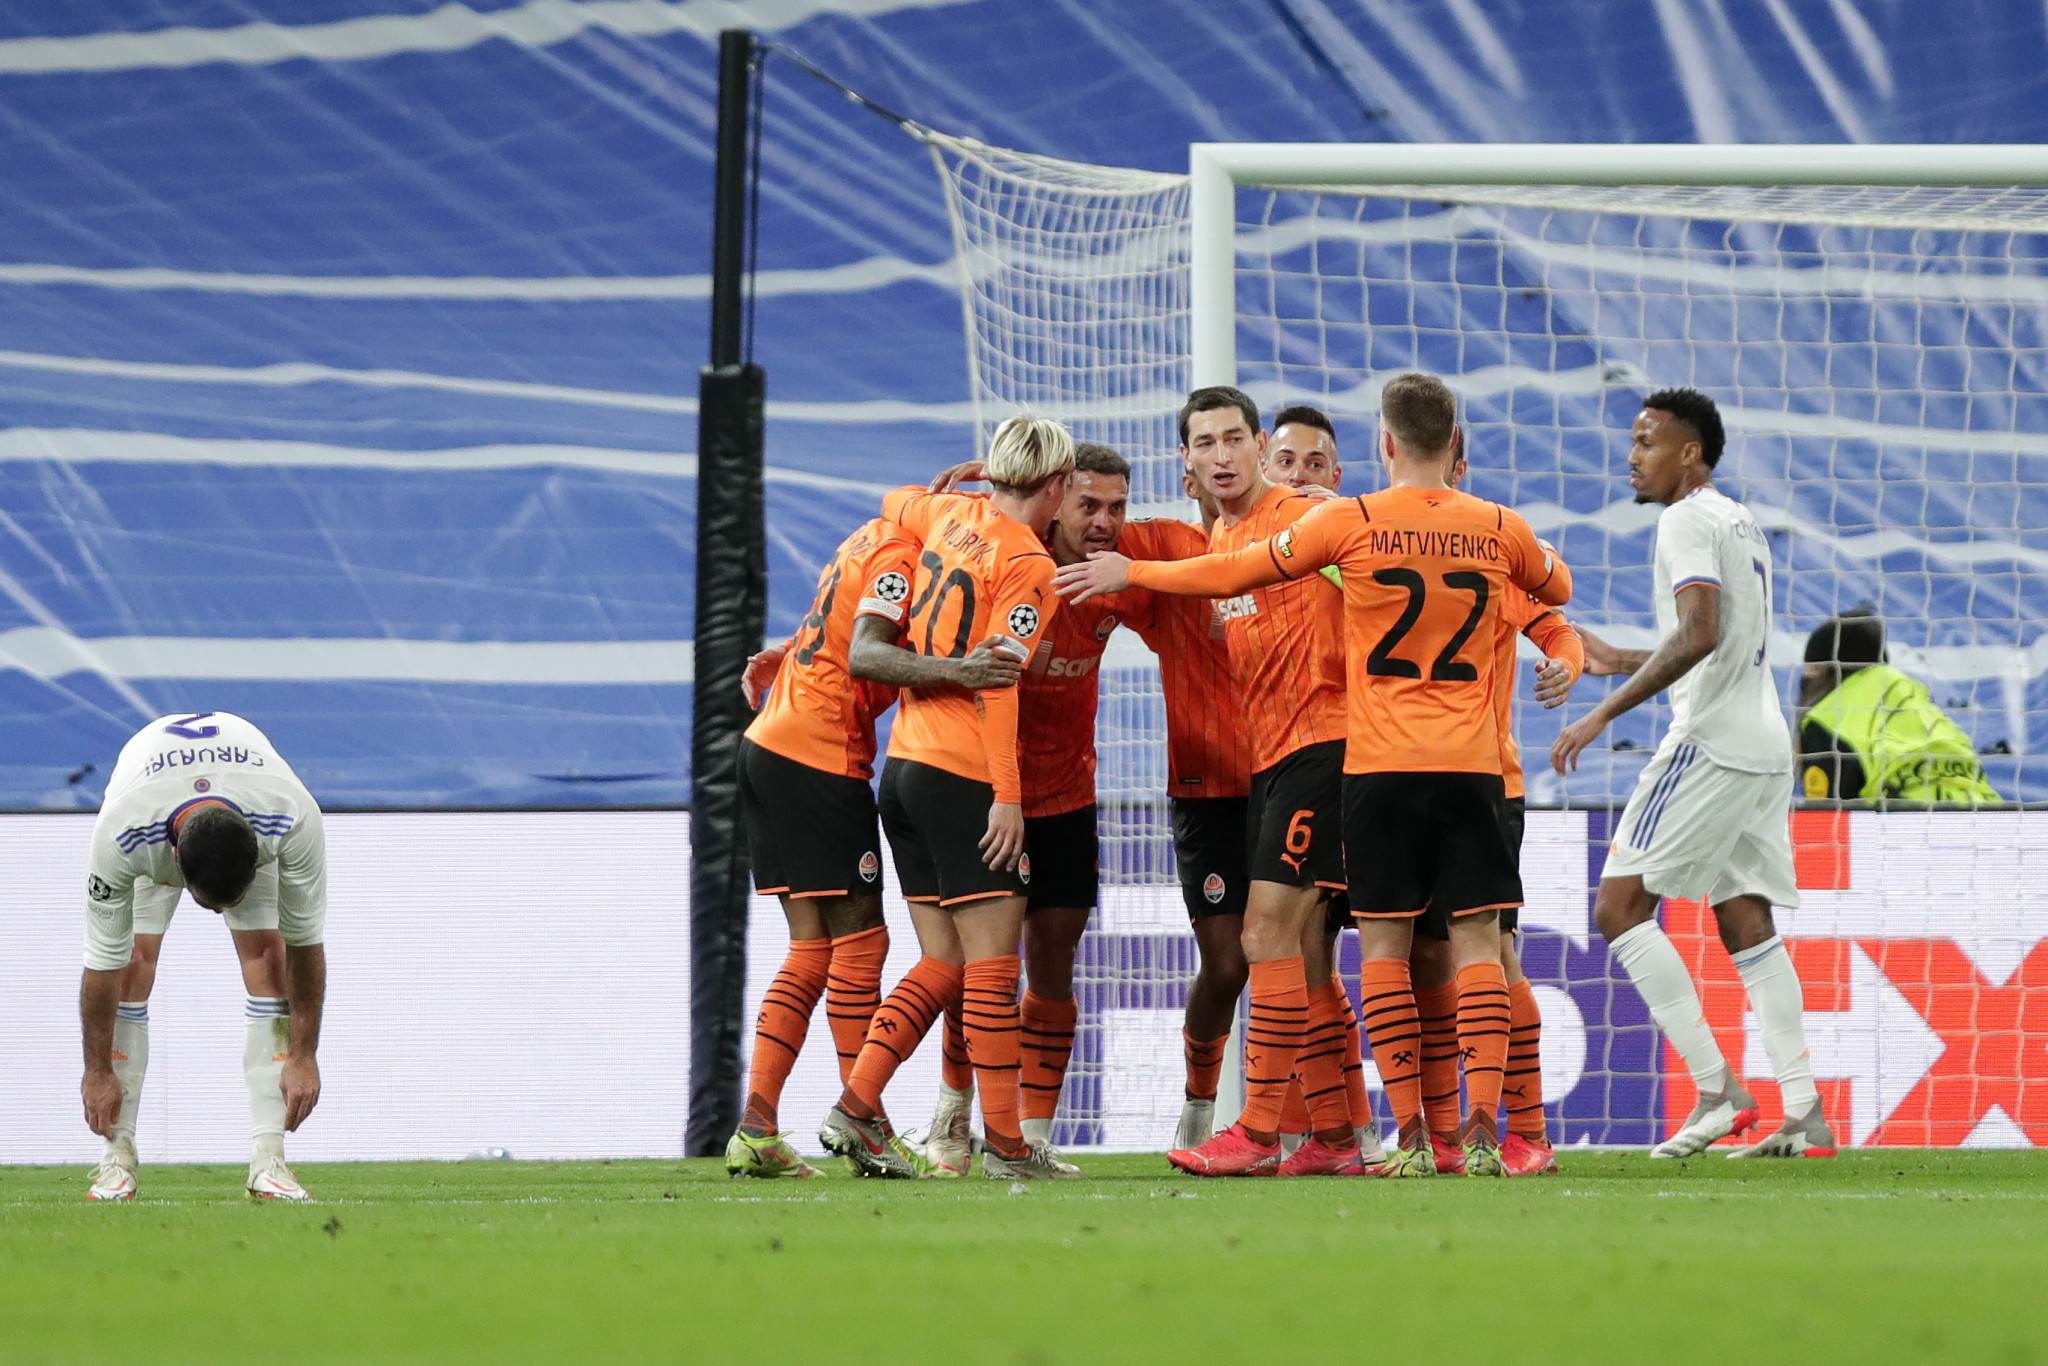 Ukrainian football club Shakhtar Donetsk has been unsuccessful in its appeal to the Court of Arbitration for Sport against FIFA’s decision to suspend player and coaching contracts allowing a free release following the invasion by Russia ©Getty Images